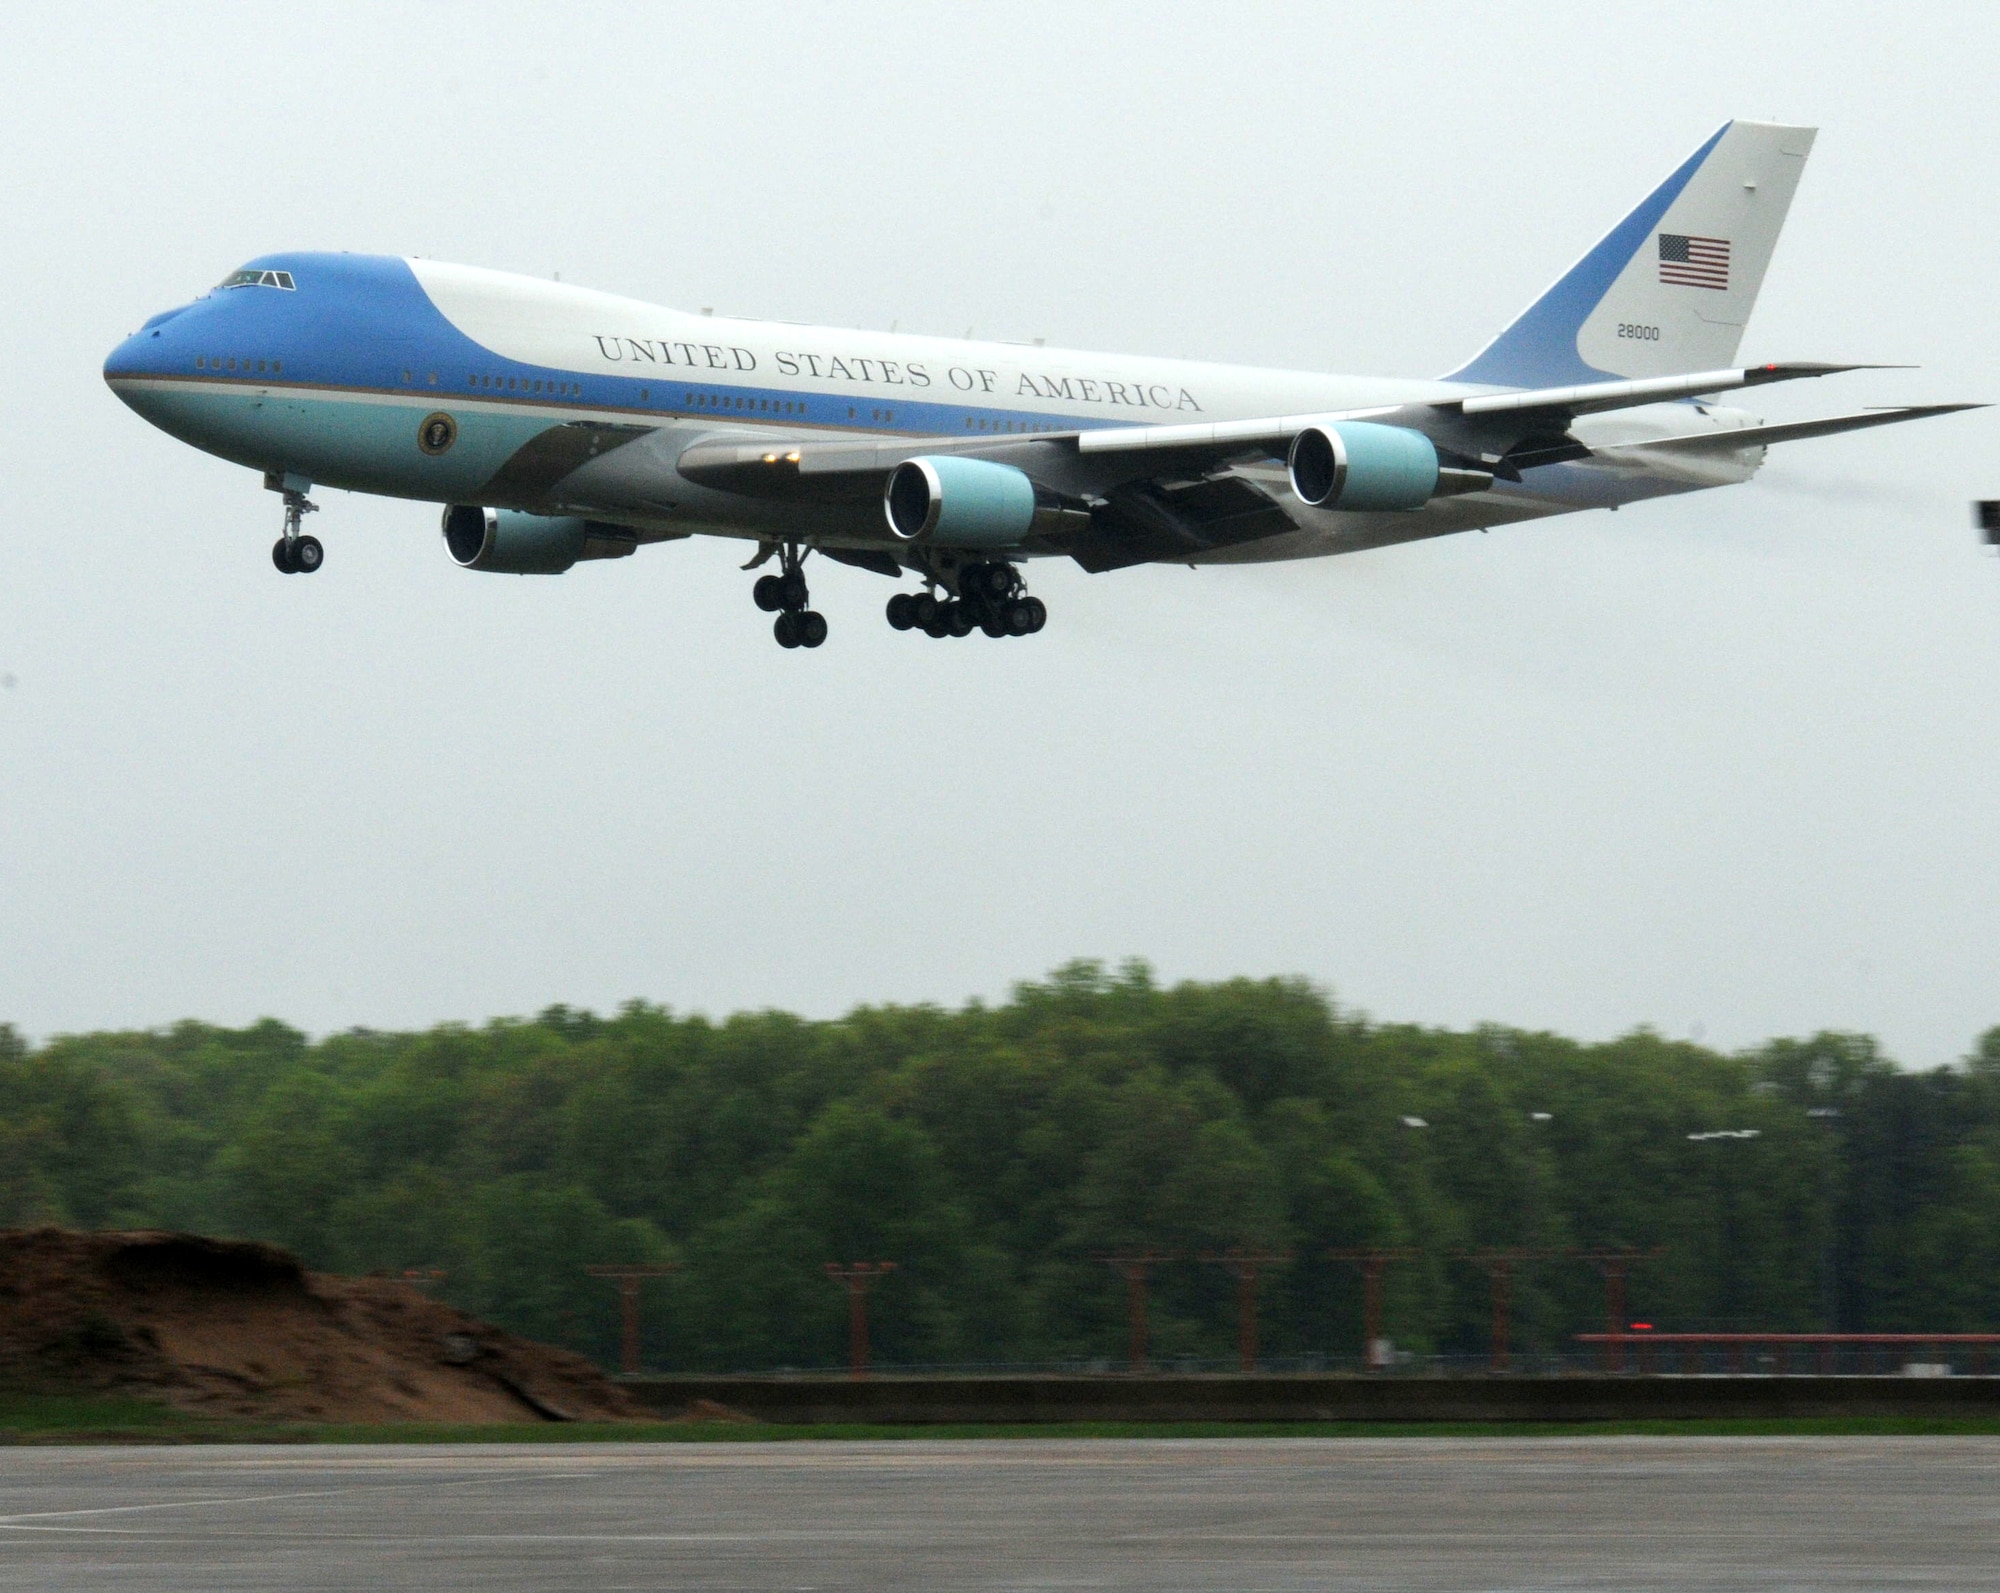 Air Force One makes its approach into Bradley International Airport before taxiing over to the ramp at Bradley Air National Guard Base in East Granby Conn. May 18, 2011. President Obama stopped at the base and greeted Air National Guardsmen before heading to New London to give the keynote address at the U.S. Coast Guard Academy’s graduation ceremony. (U.S. Air Force photo by Airman 1st Class Emmanuel Santiago)